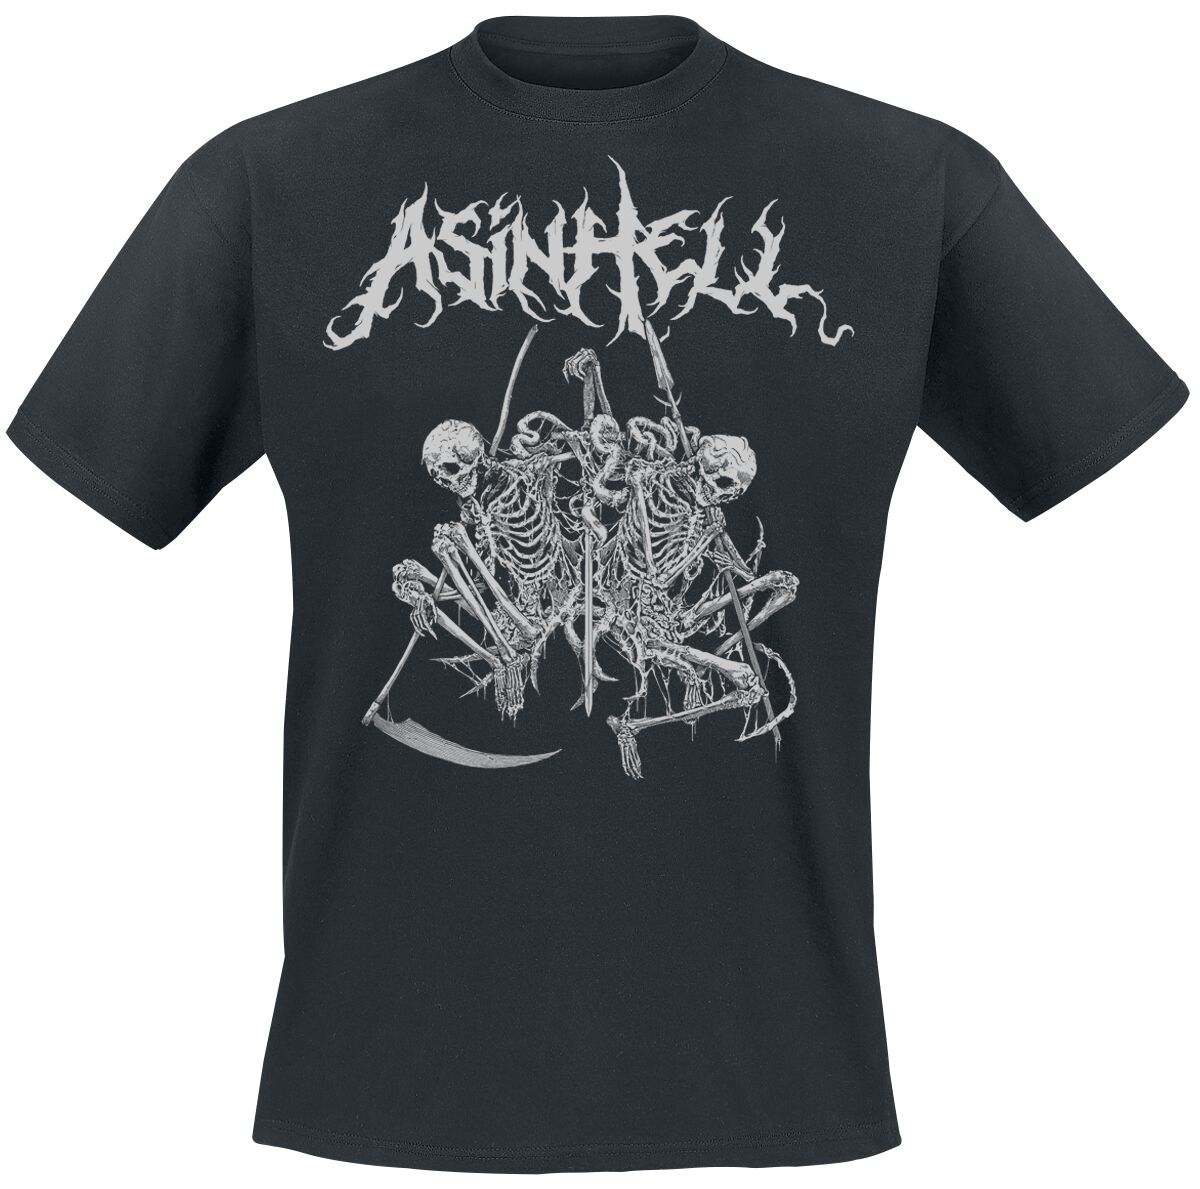 Fall of the Loyal Warrior | Asinhell T-Shirt | EMP